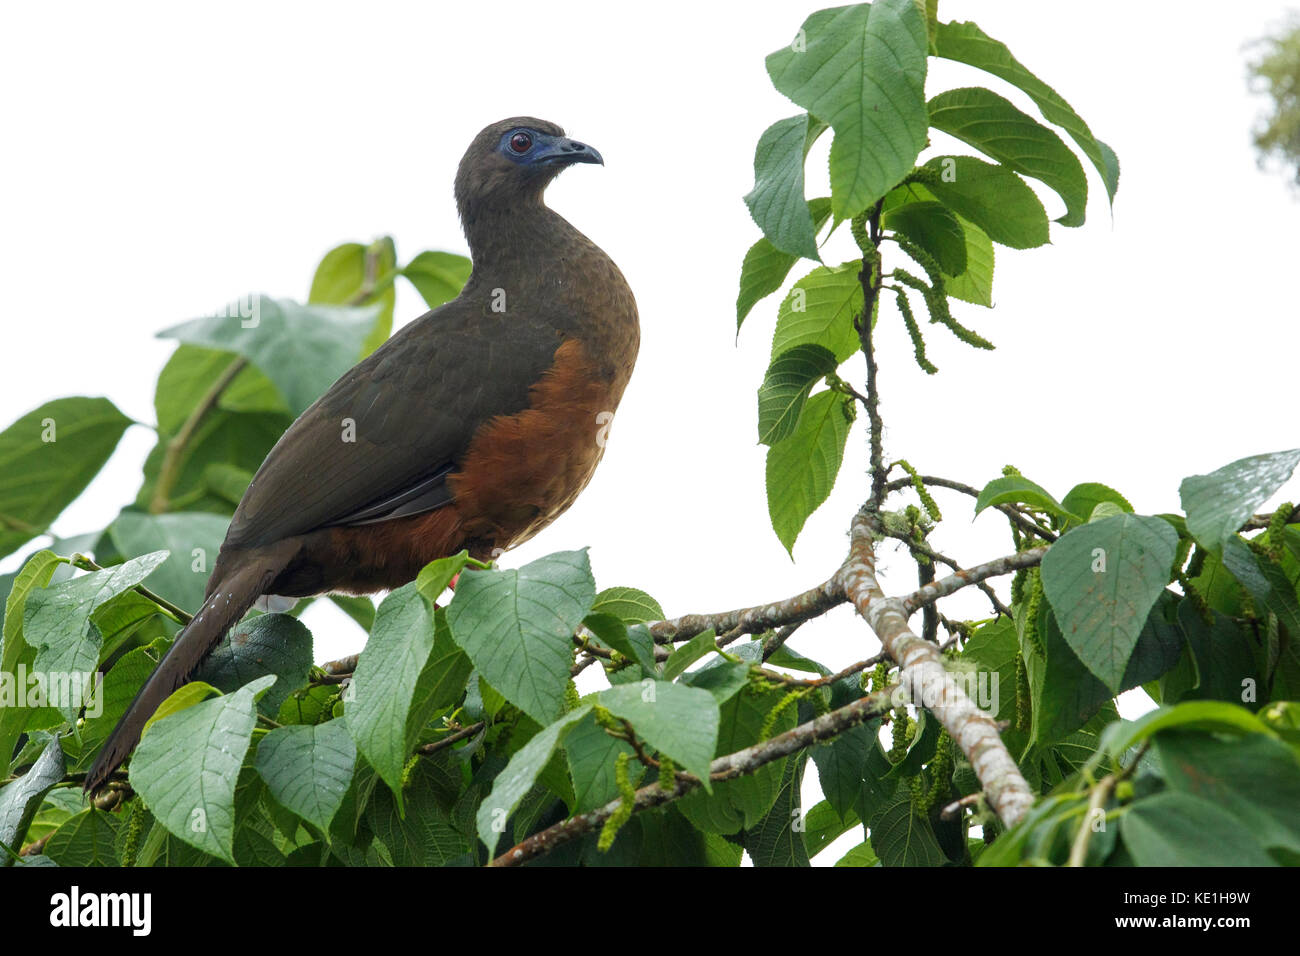 Sickle-winged Guan (Chamaepetes goudotii) perched on a branch in the Andes Mountains of Colombia. Stock Photo